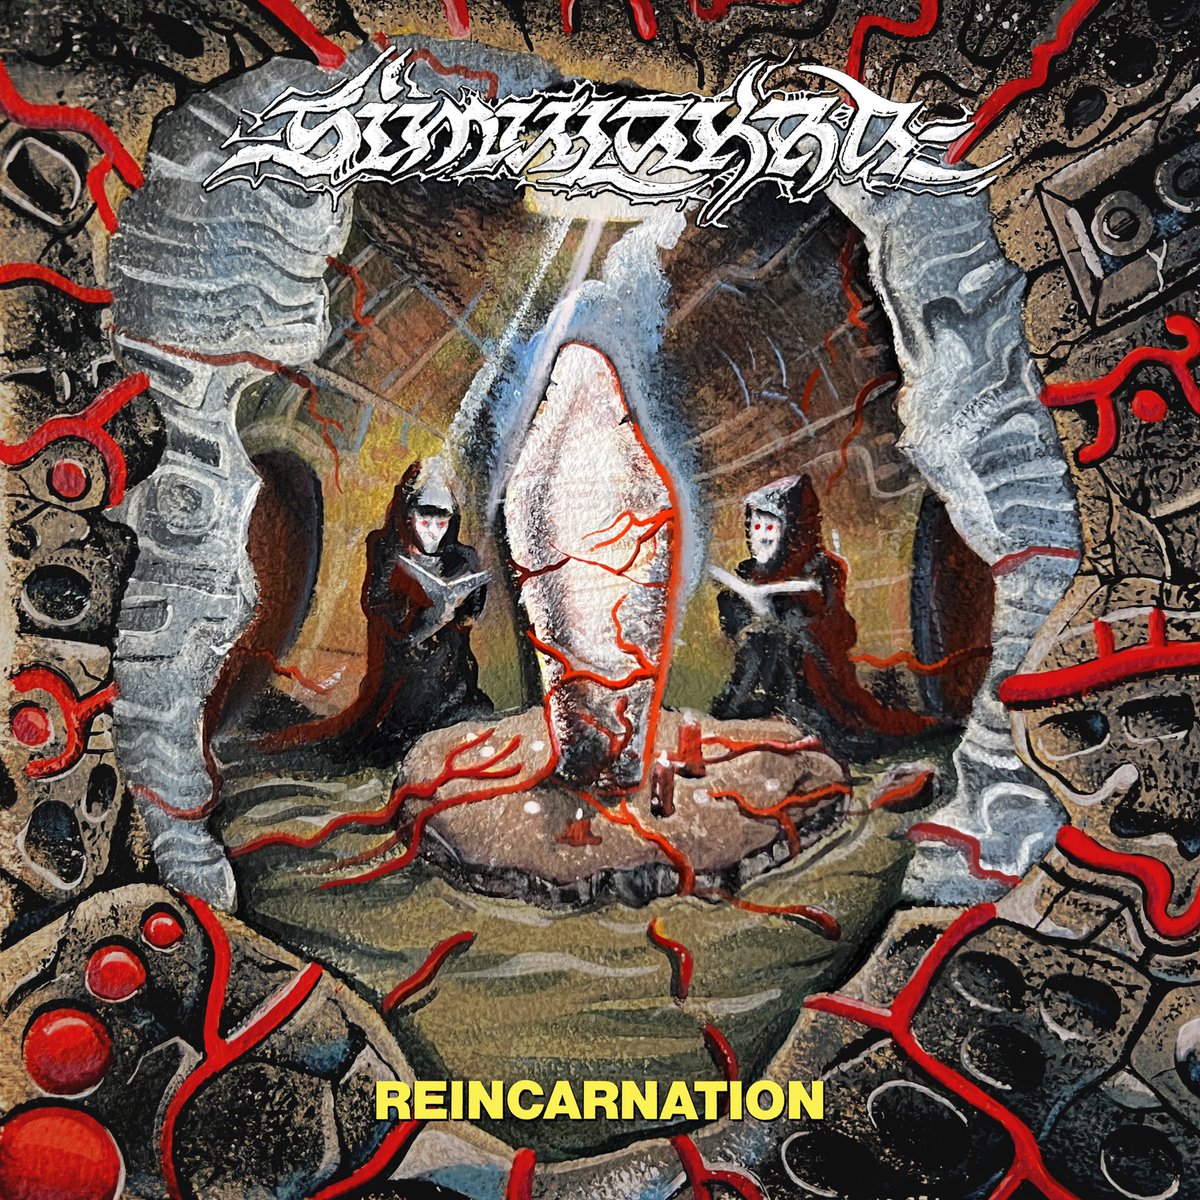 “REINCARNATION” OUT NOW vyd.co/Reincarnation